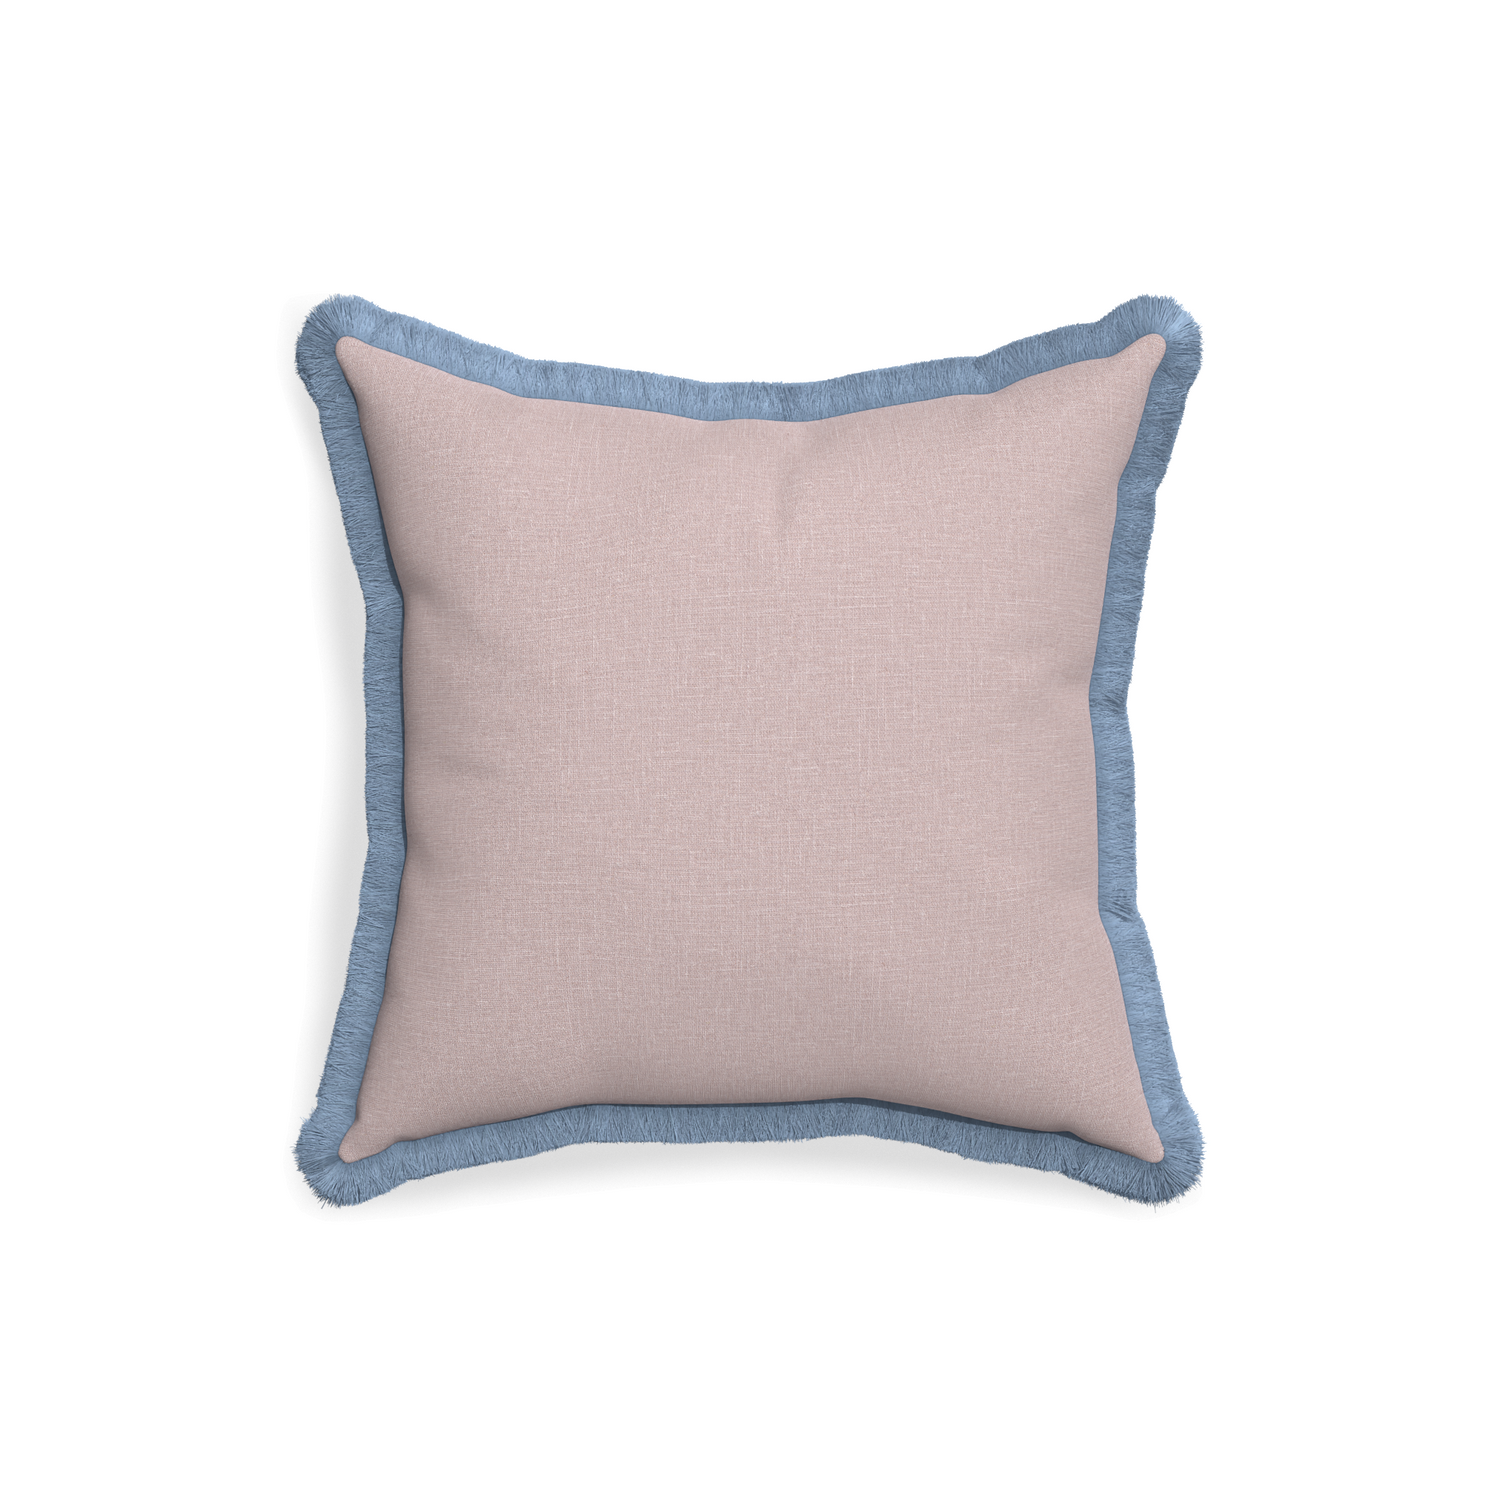 18-square orchid custom mauve pinkpillow with sky fringe on white background